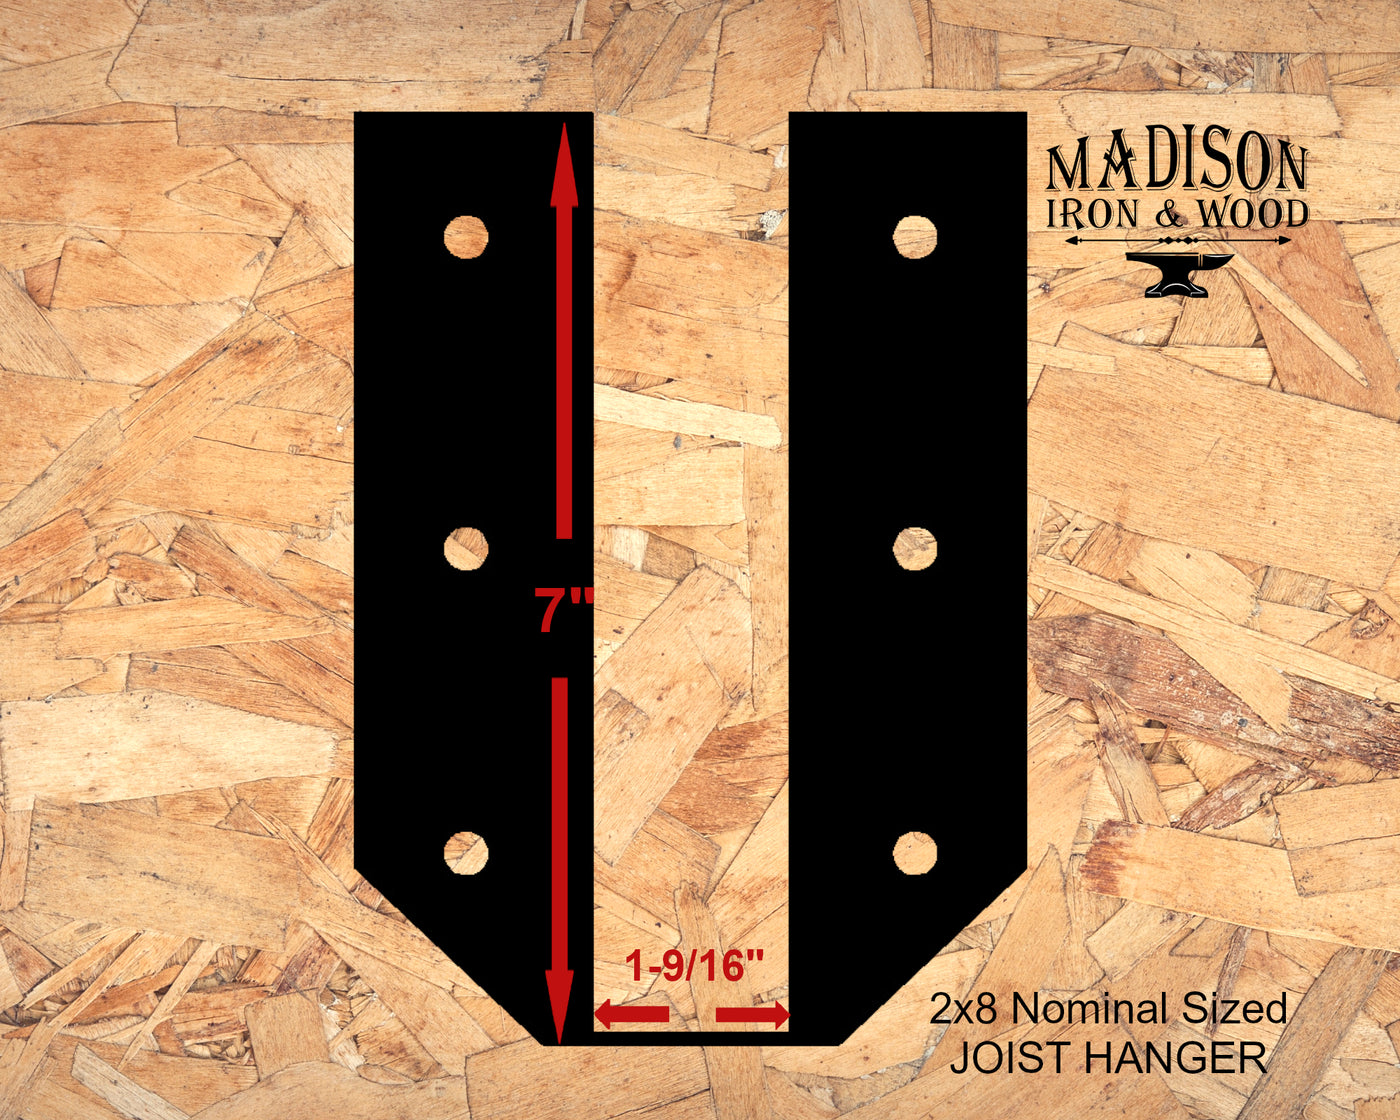 2"x8" Joist Hanger Bracket - Madison Iron and Wood - Brackets - metal outdoor decor - Steel deocrations - american made products - veteran owned business products - fencing decorations - fencing supplies - custom wall decorations - personalized wall signs - steel - decorative post caps - steel post caps - metal post caps - brackets - structural brackets - home improvement - easter - easter decorations - easter gift - easter yard decor